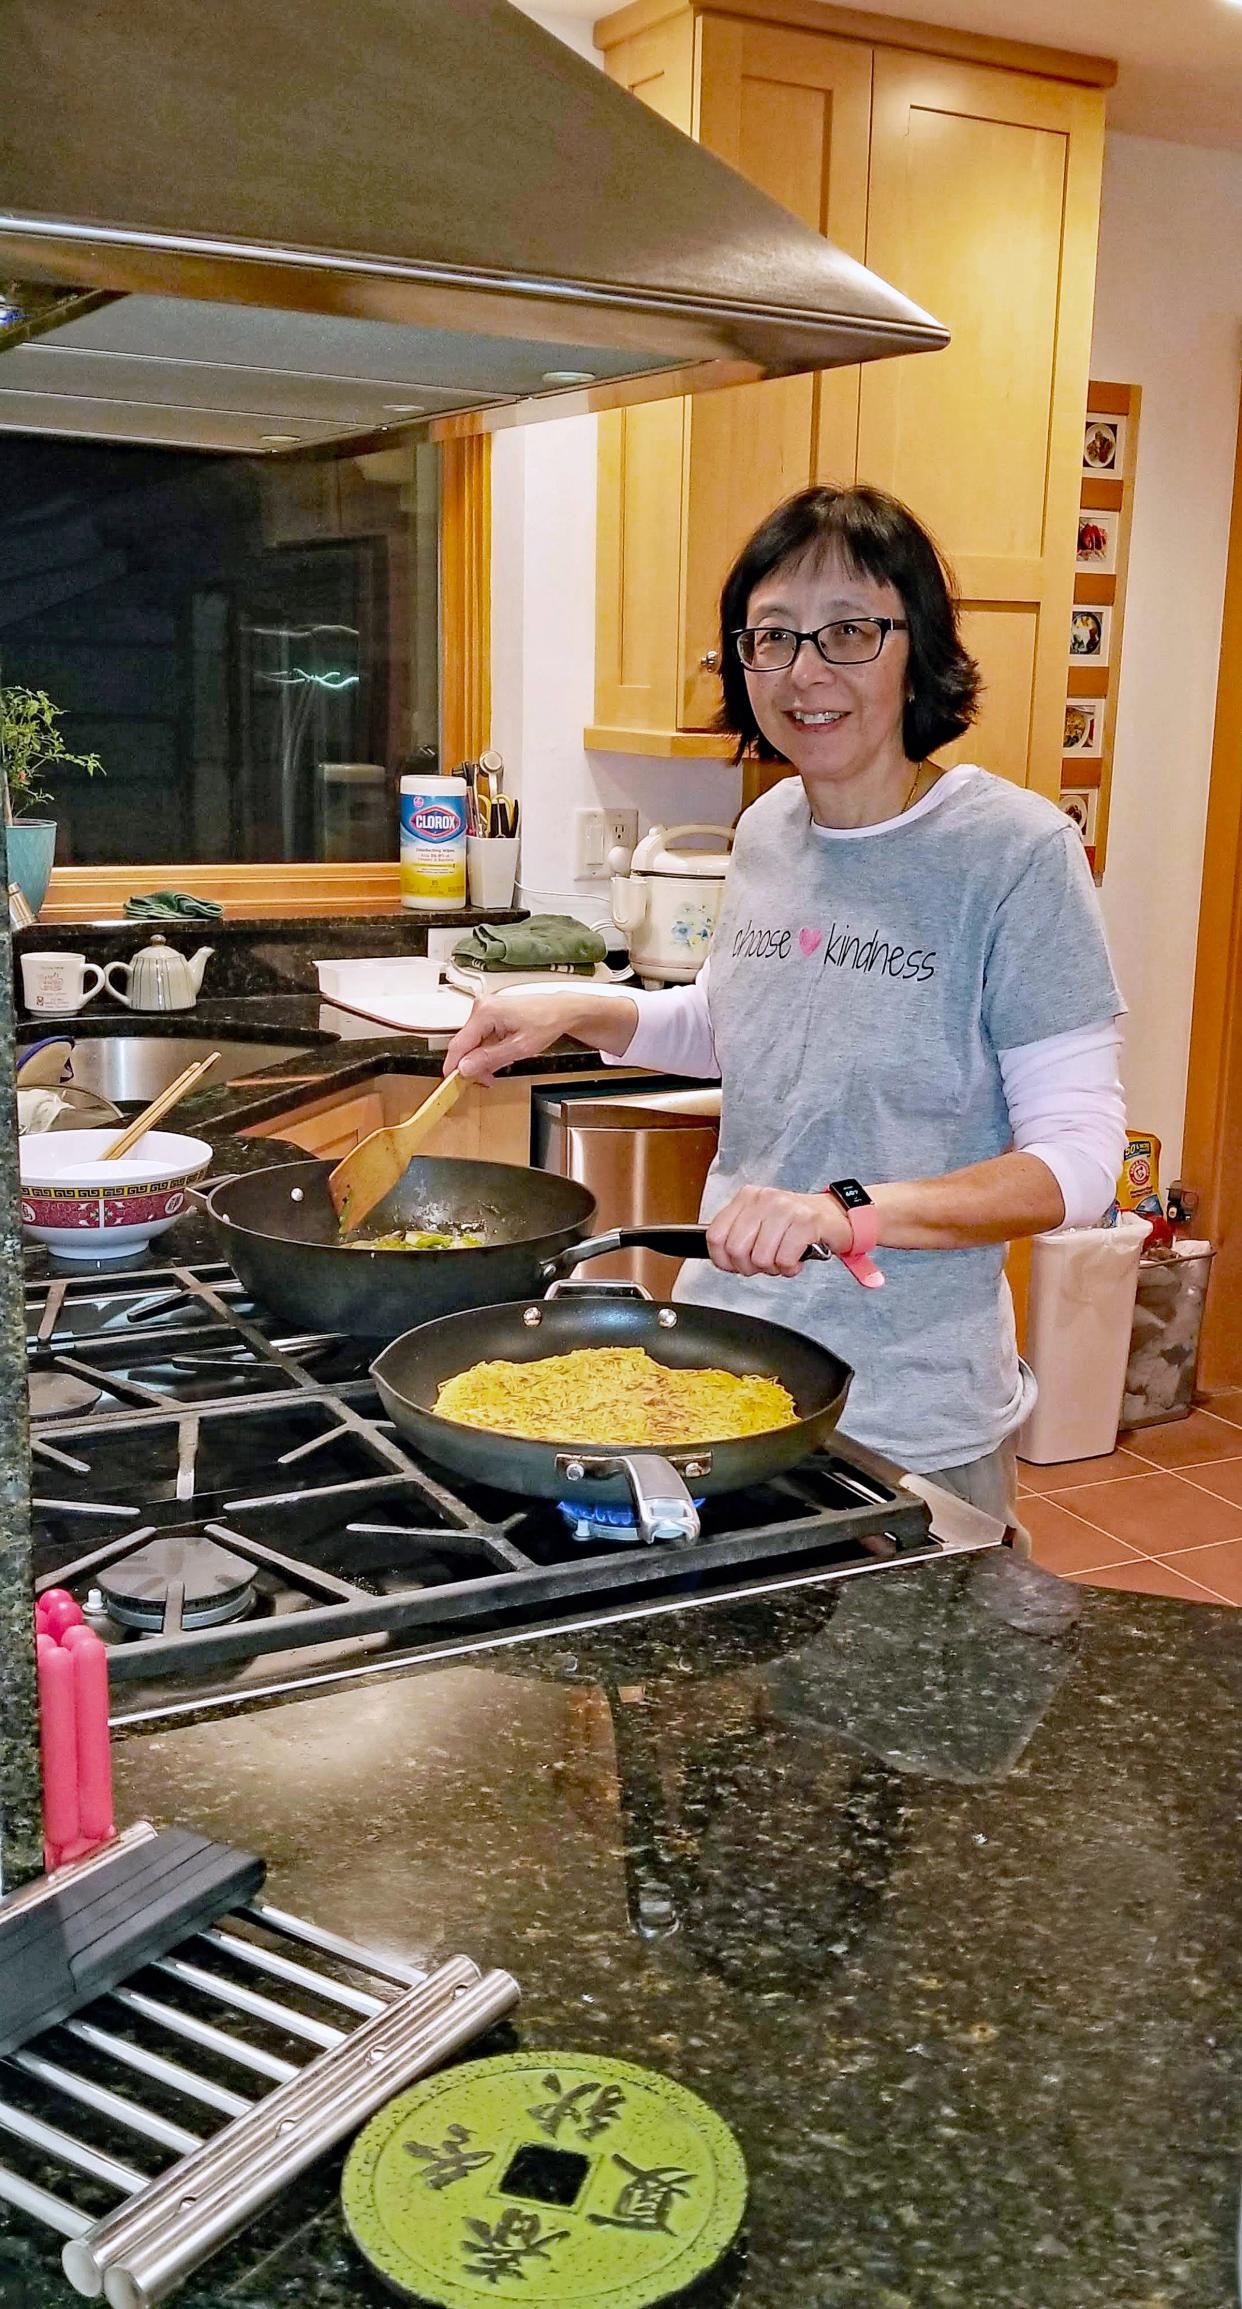 While her dad cooked on a traditional stainless steel wok, Mabel prefers nonstick for ease. Here, she makes Cantonese chow mein.